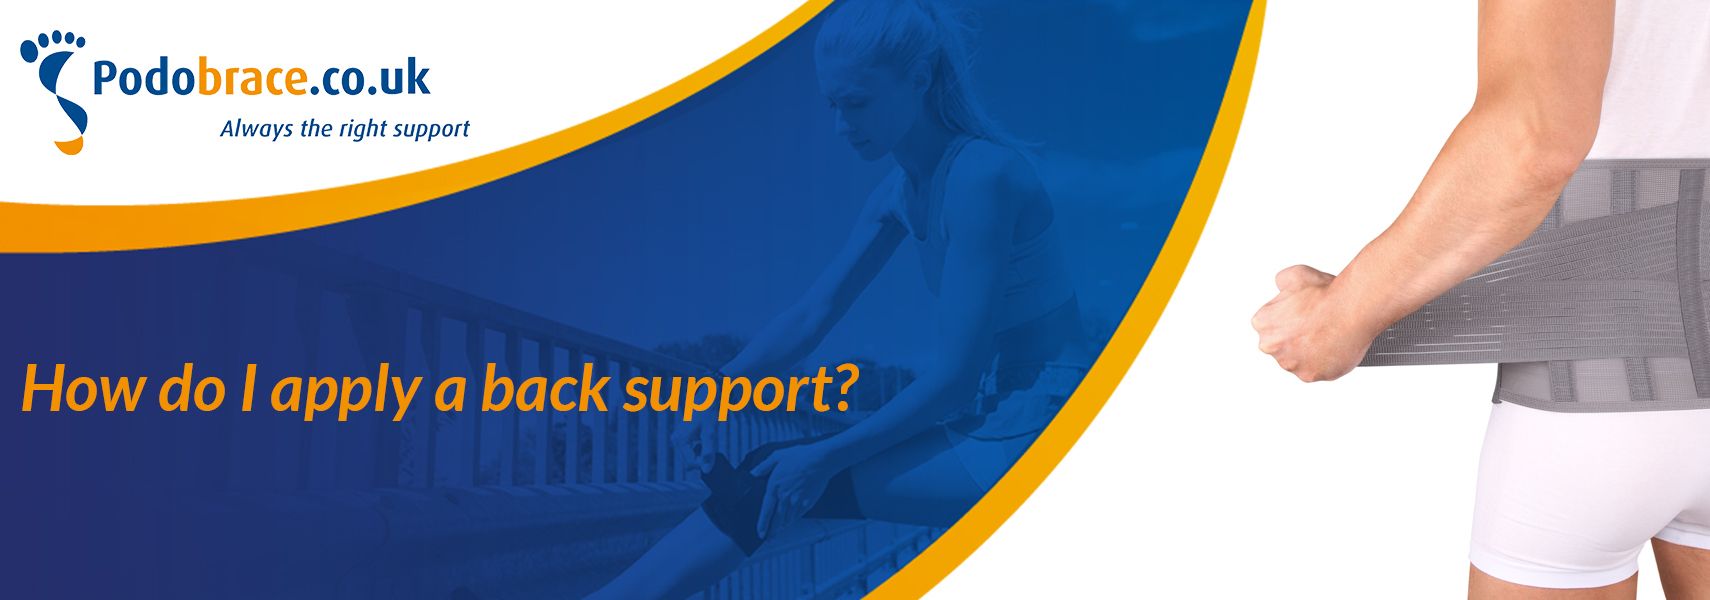 How do I apply a back support